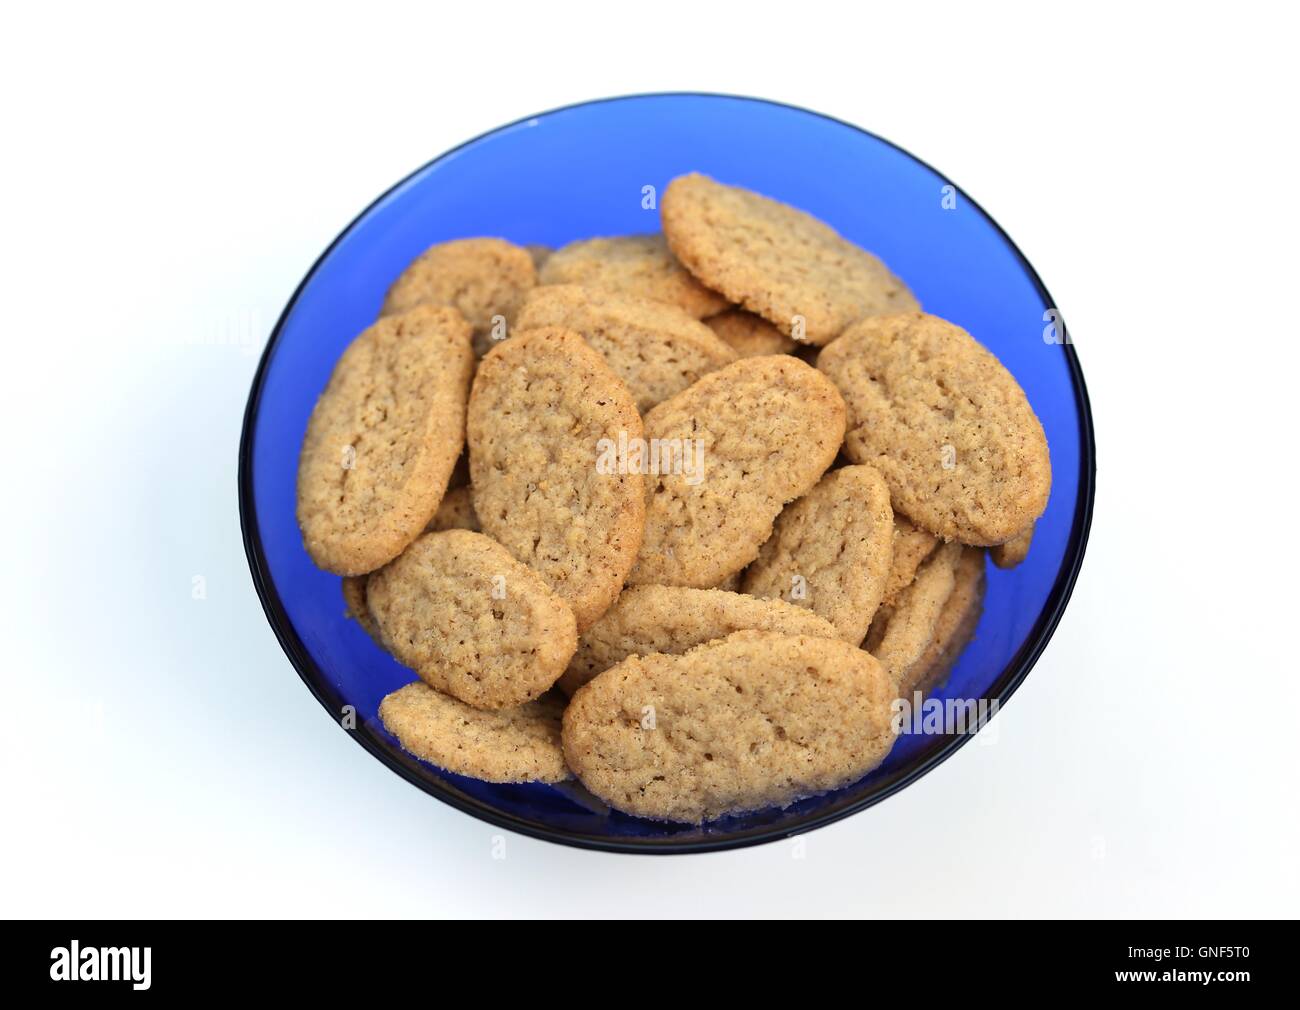 Cookies in a Blue Glass Bowl. Pile of oval homemade butter cookies in a round blue transparent glass dish, isolated on white background, top view. Stock Photo